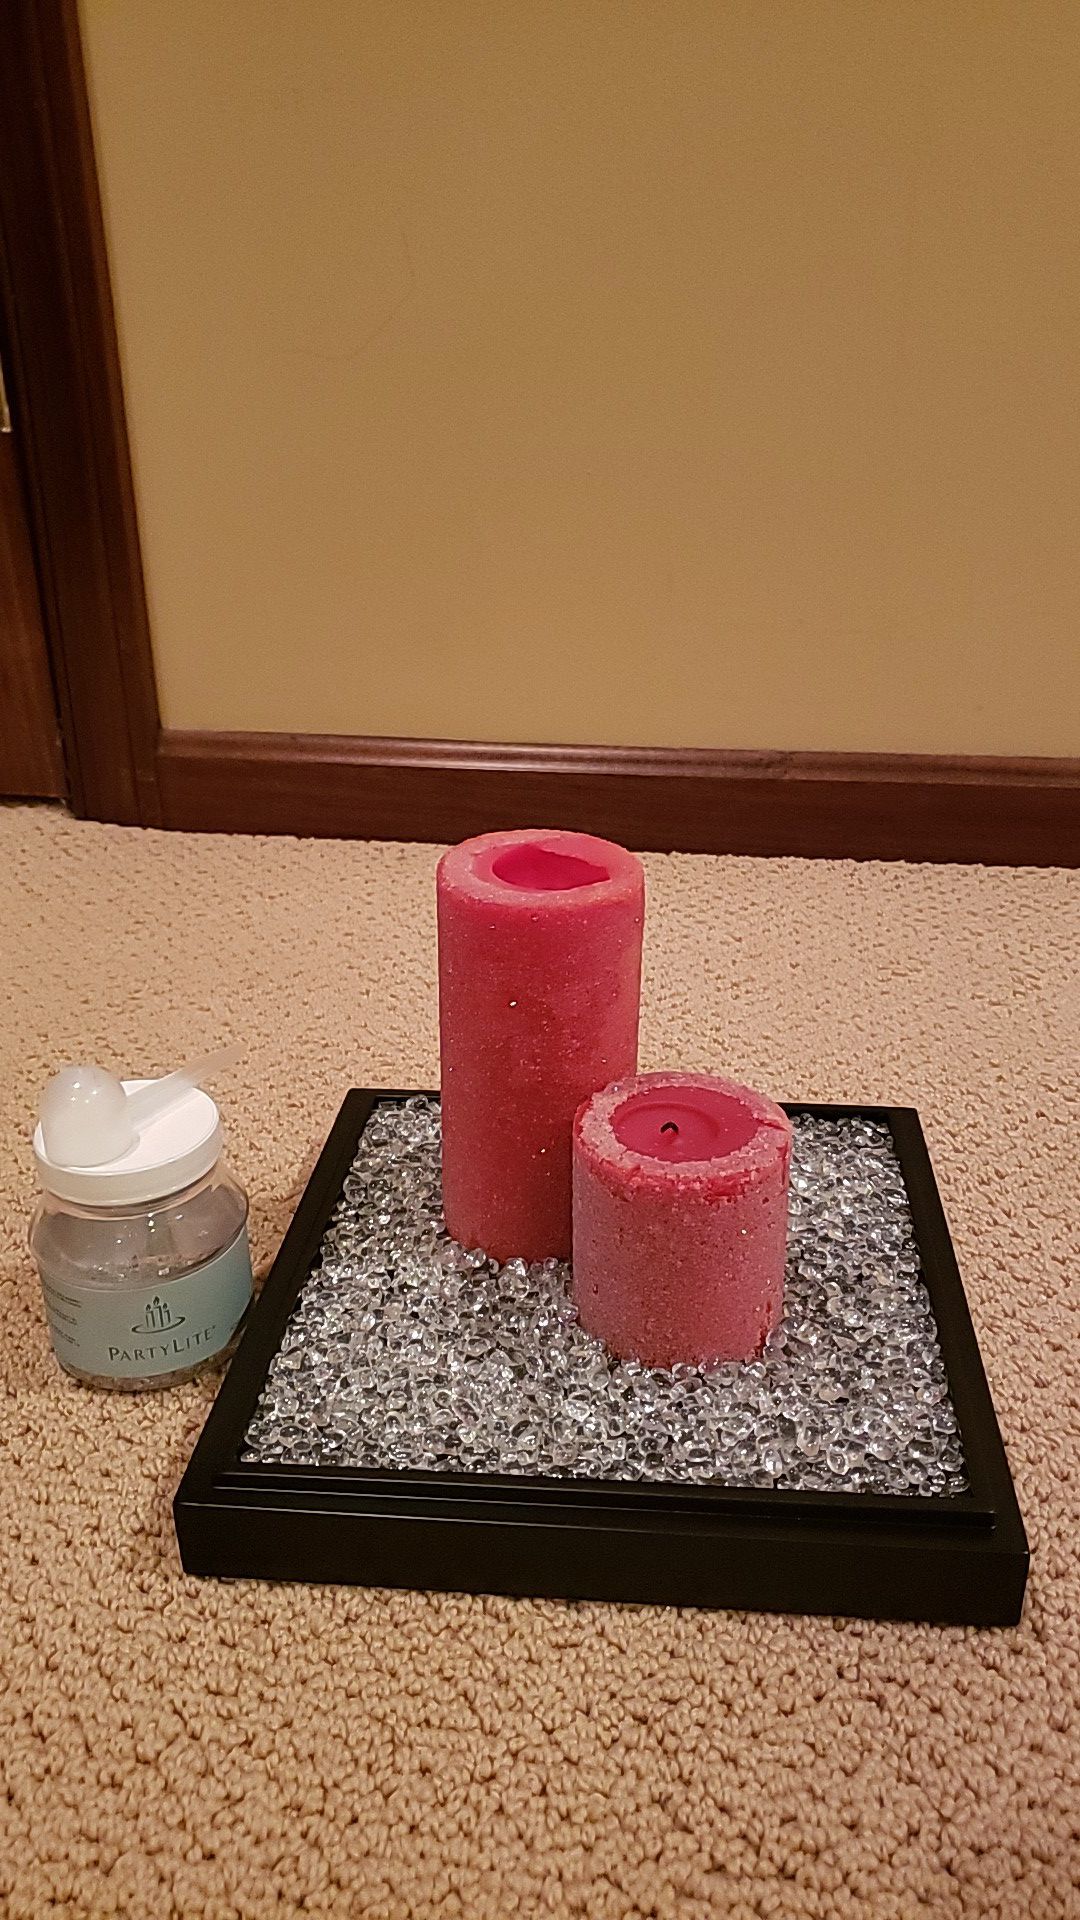 Partylite candle holder 2 in 1 plus candles